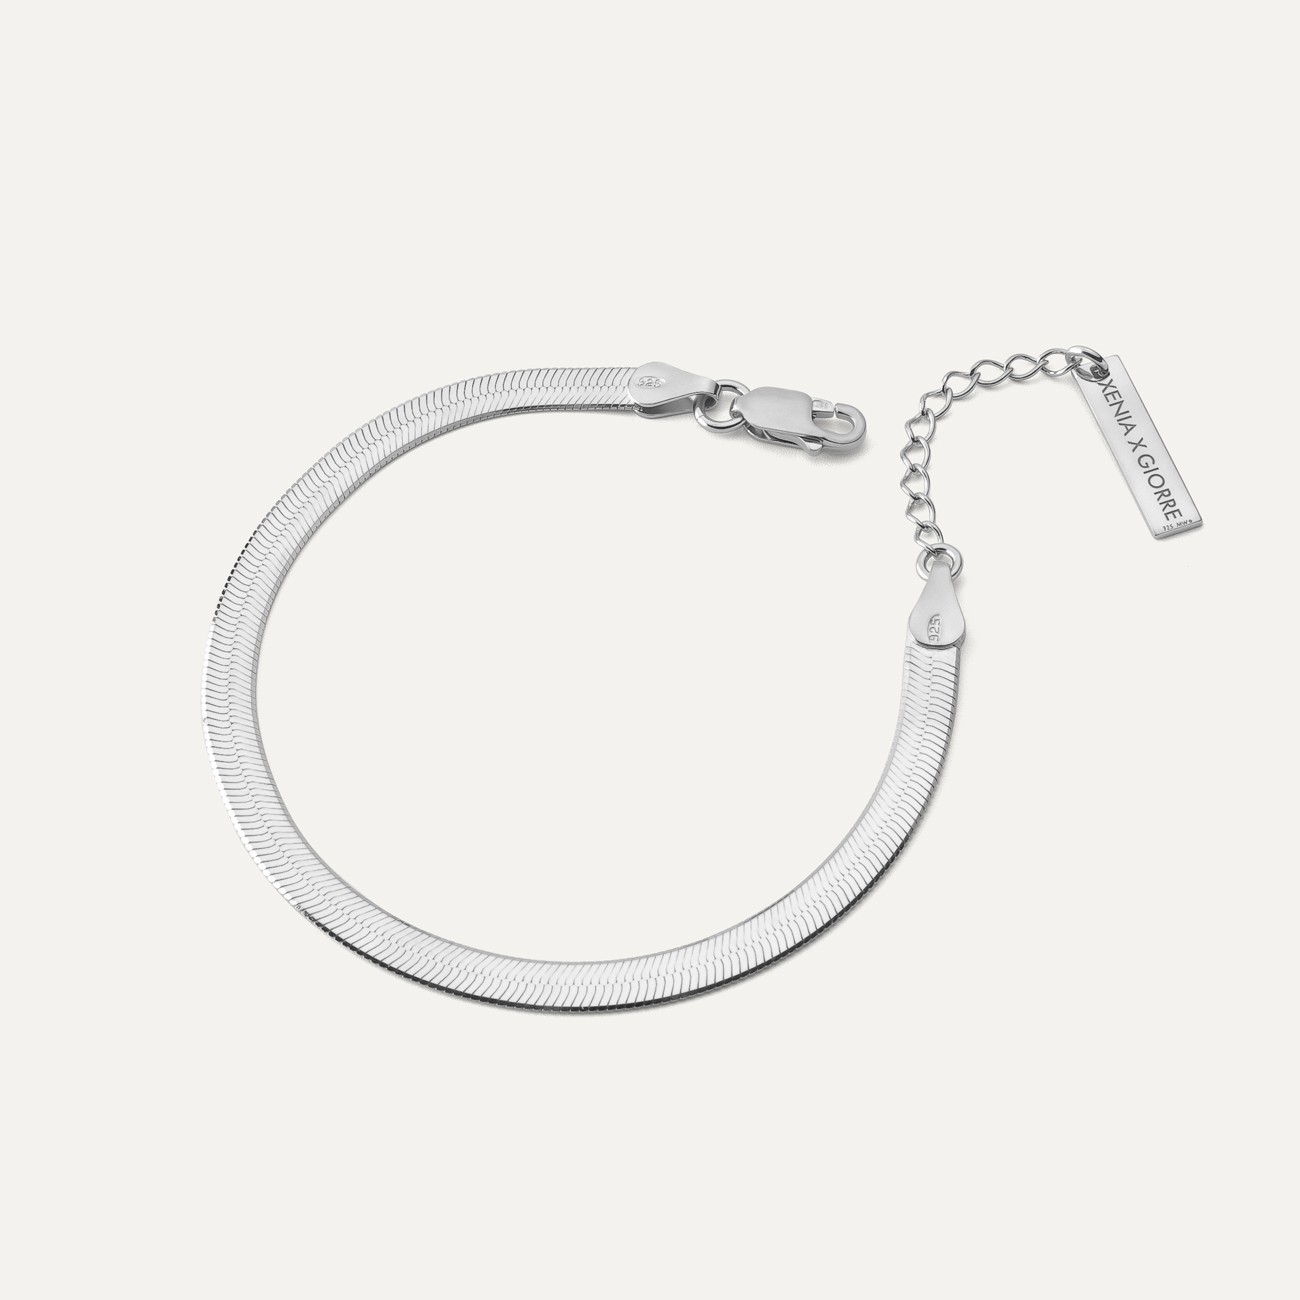 Flaches armband sterling silber 925